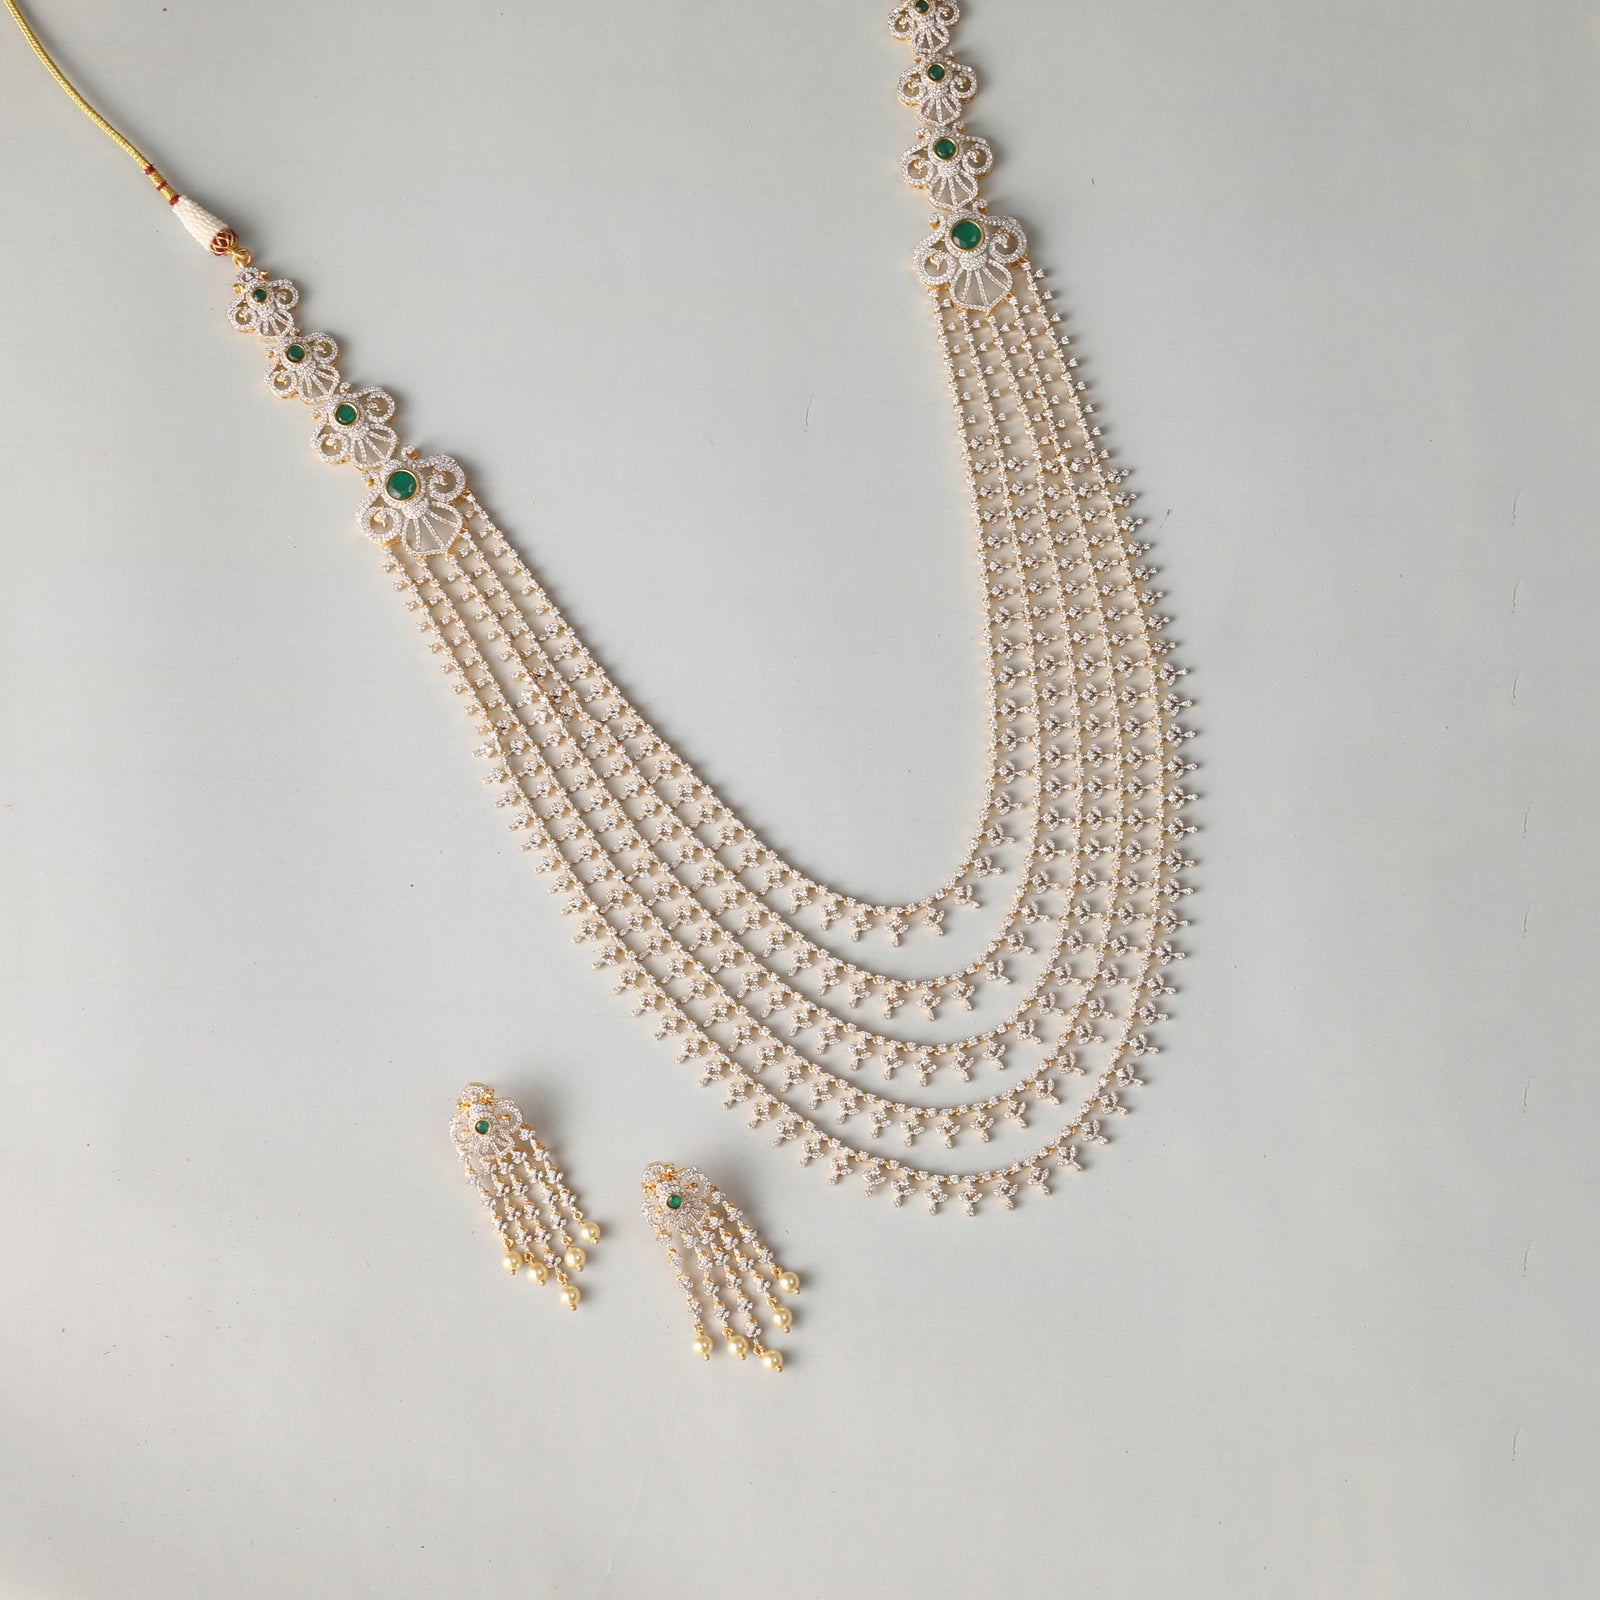 Shop Pure 925 Indian Silver Jewellery Online